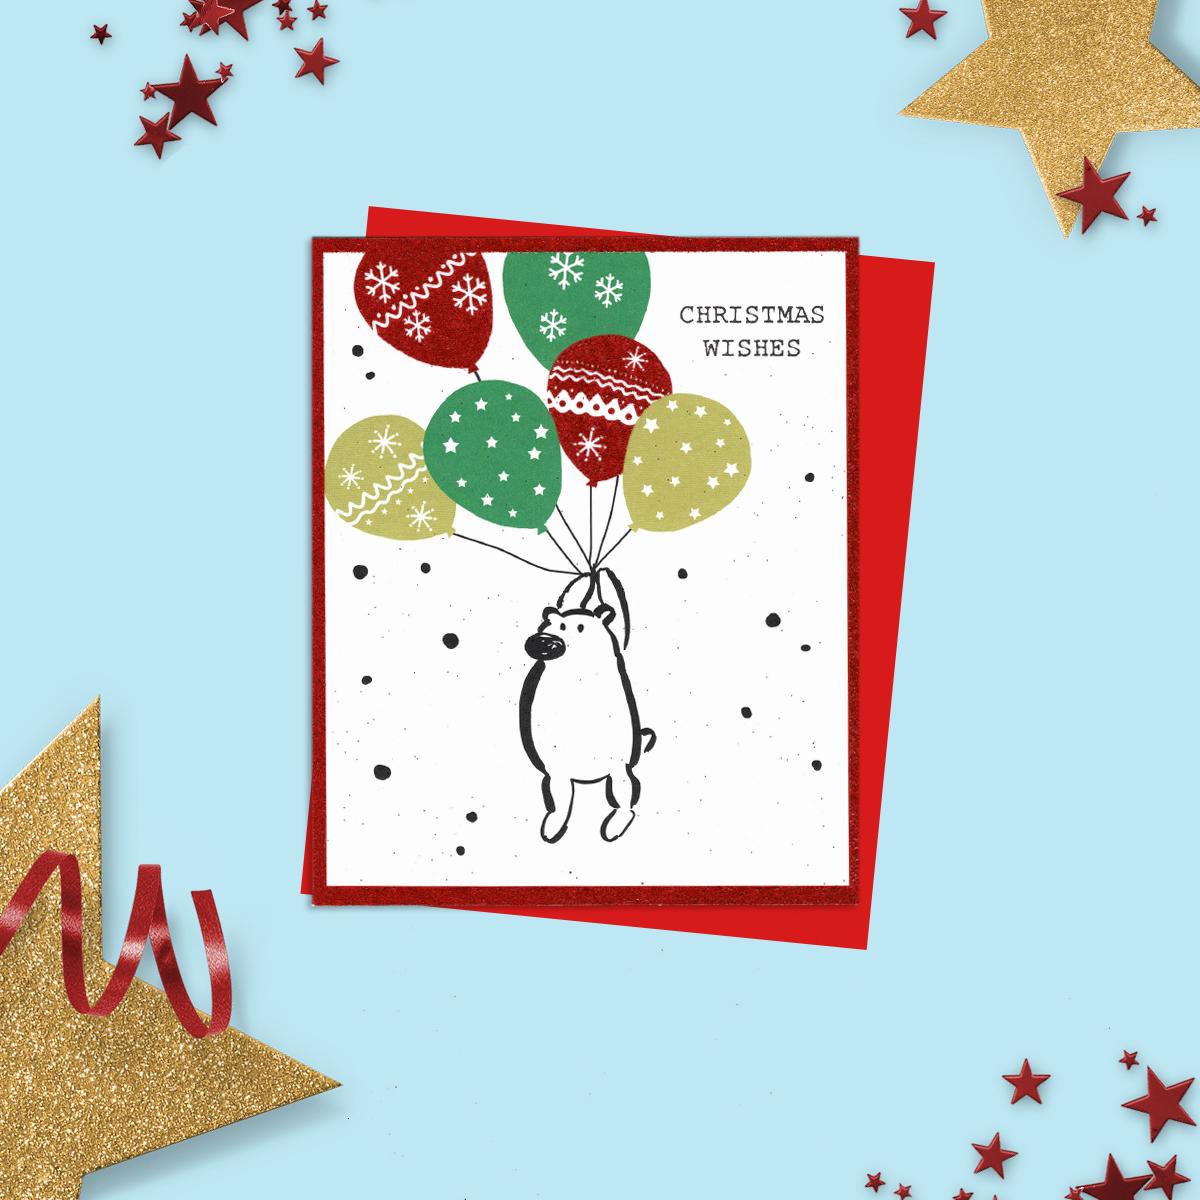 General Christmas Card Featuring A Doodle Of a Bear With Coloured Balloons. Added Glitter And Red Envelope To Finish